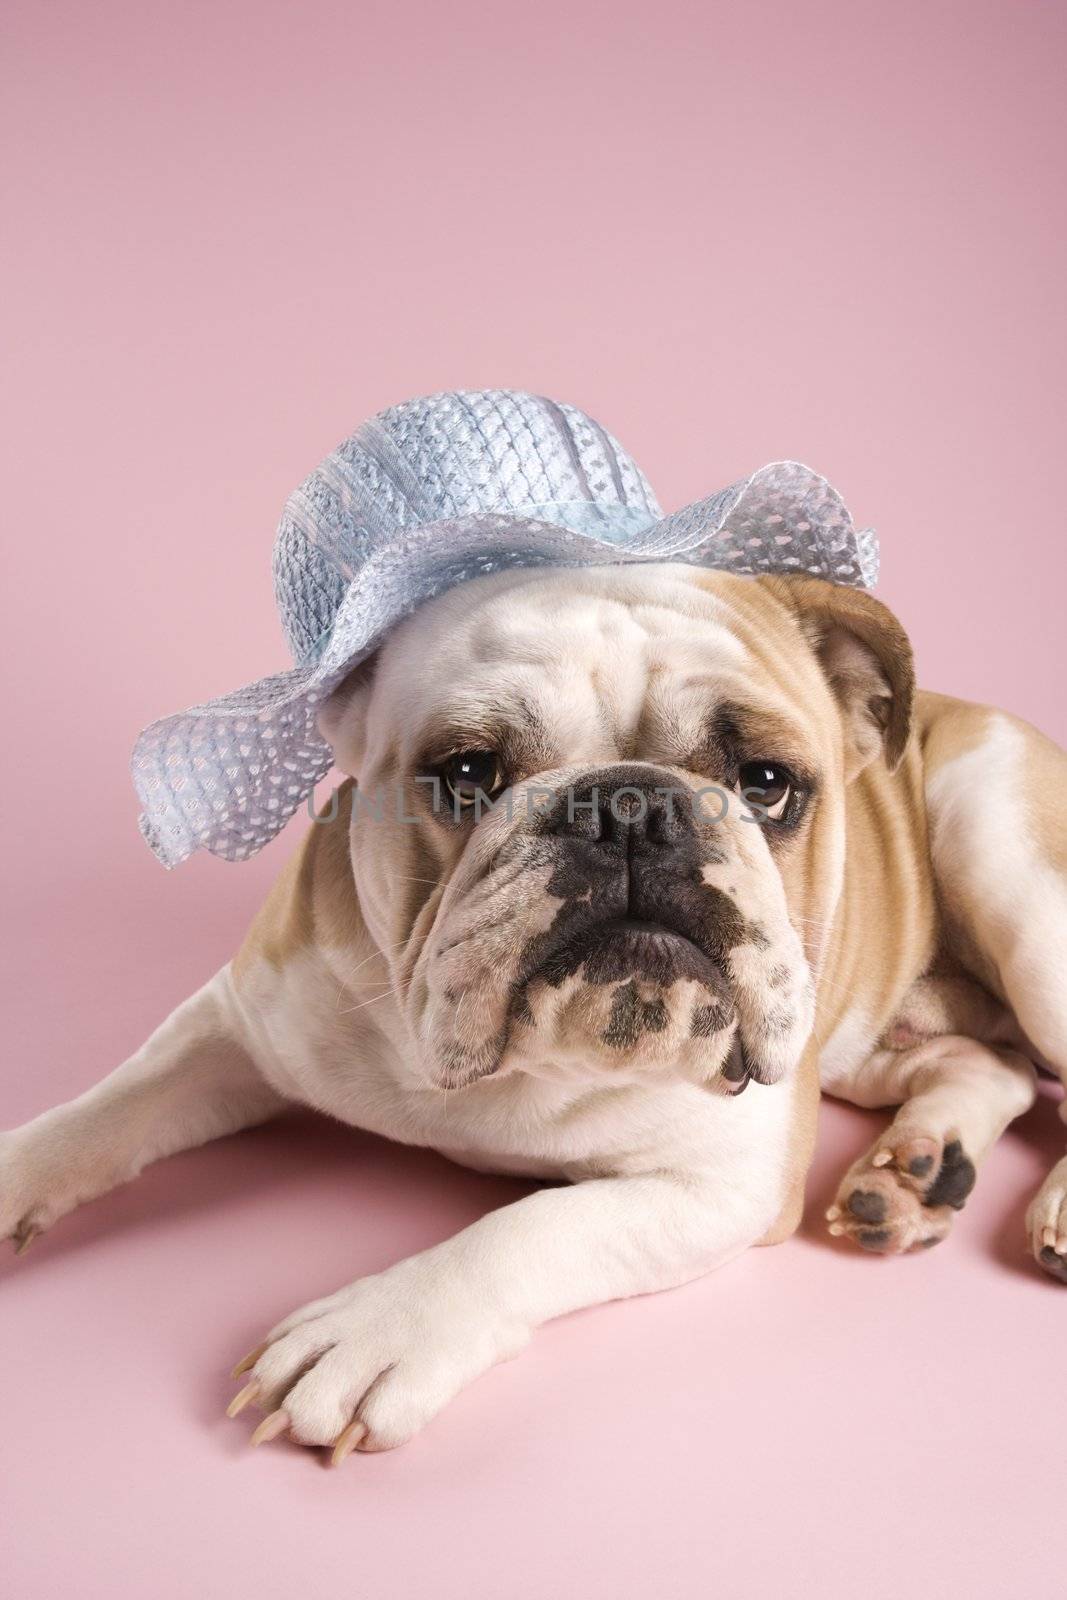 Unenthusiastic English Bulldog on pink background looking at viewer and wearing a bonnet.